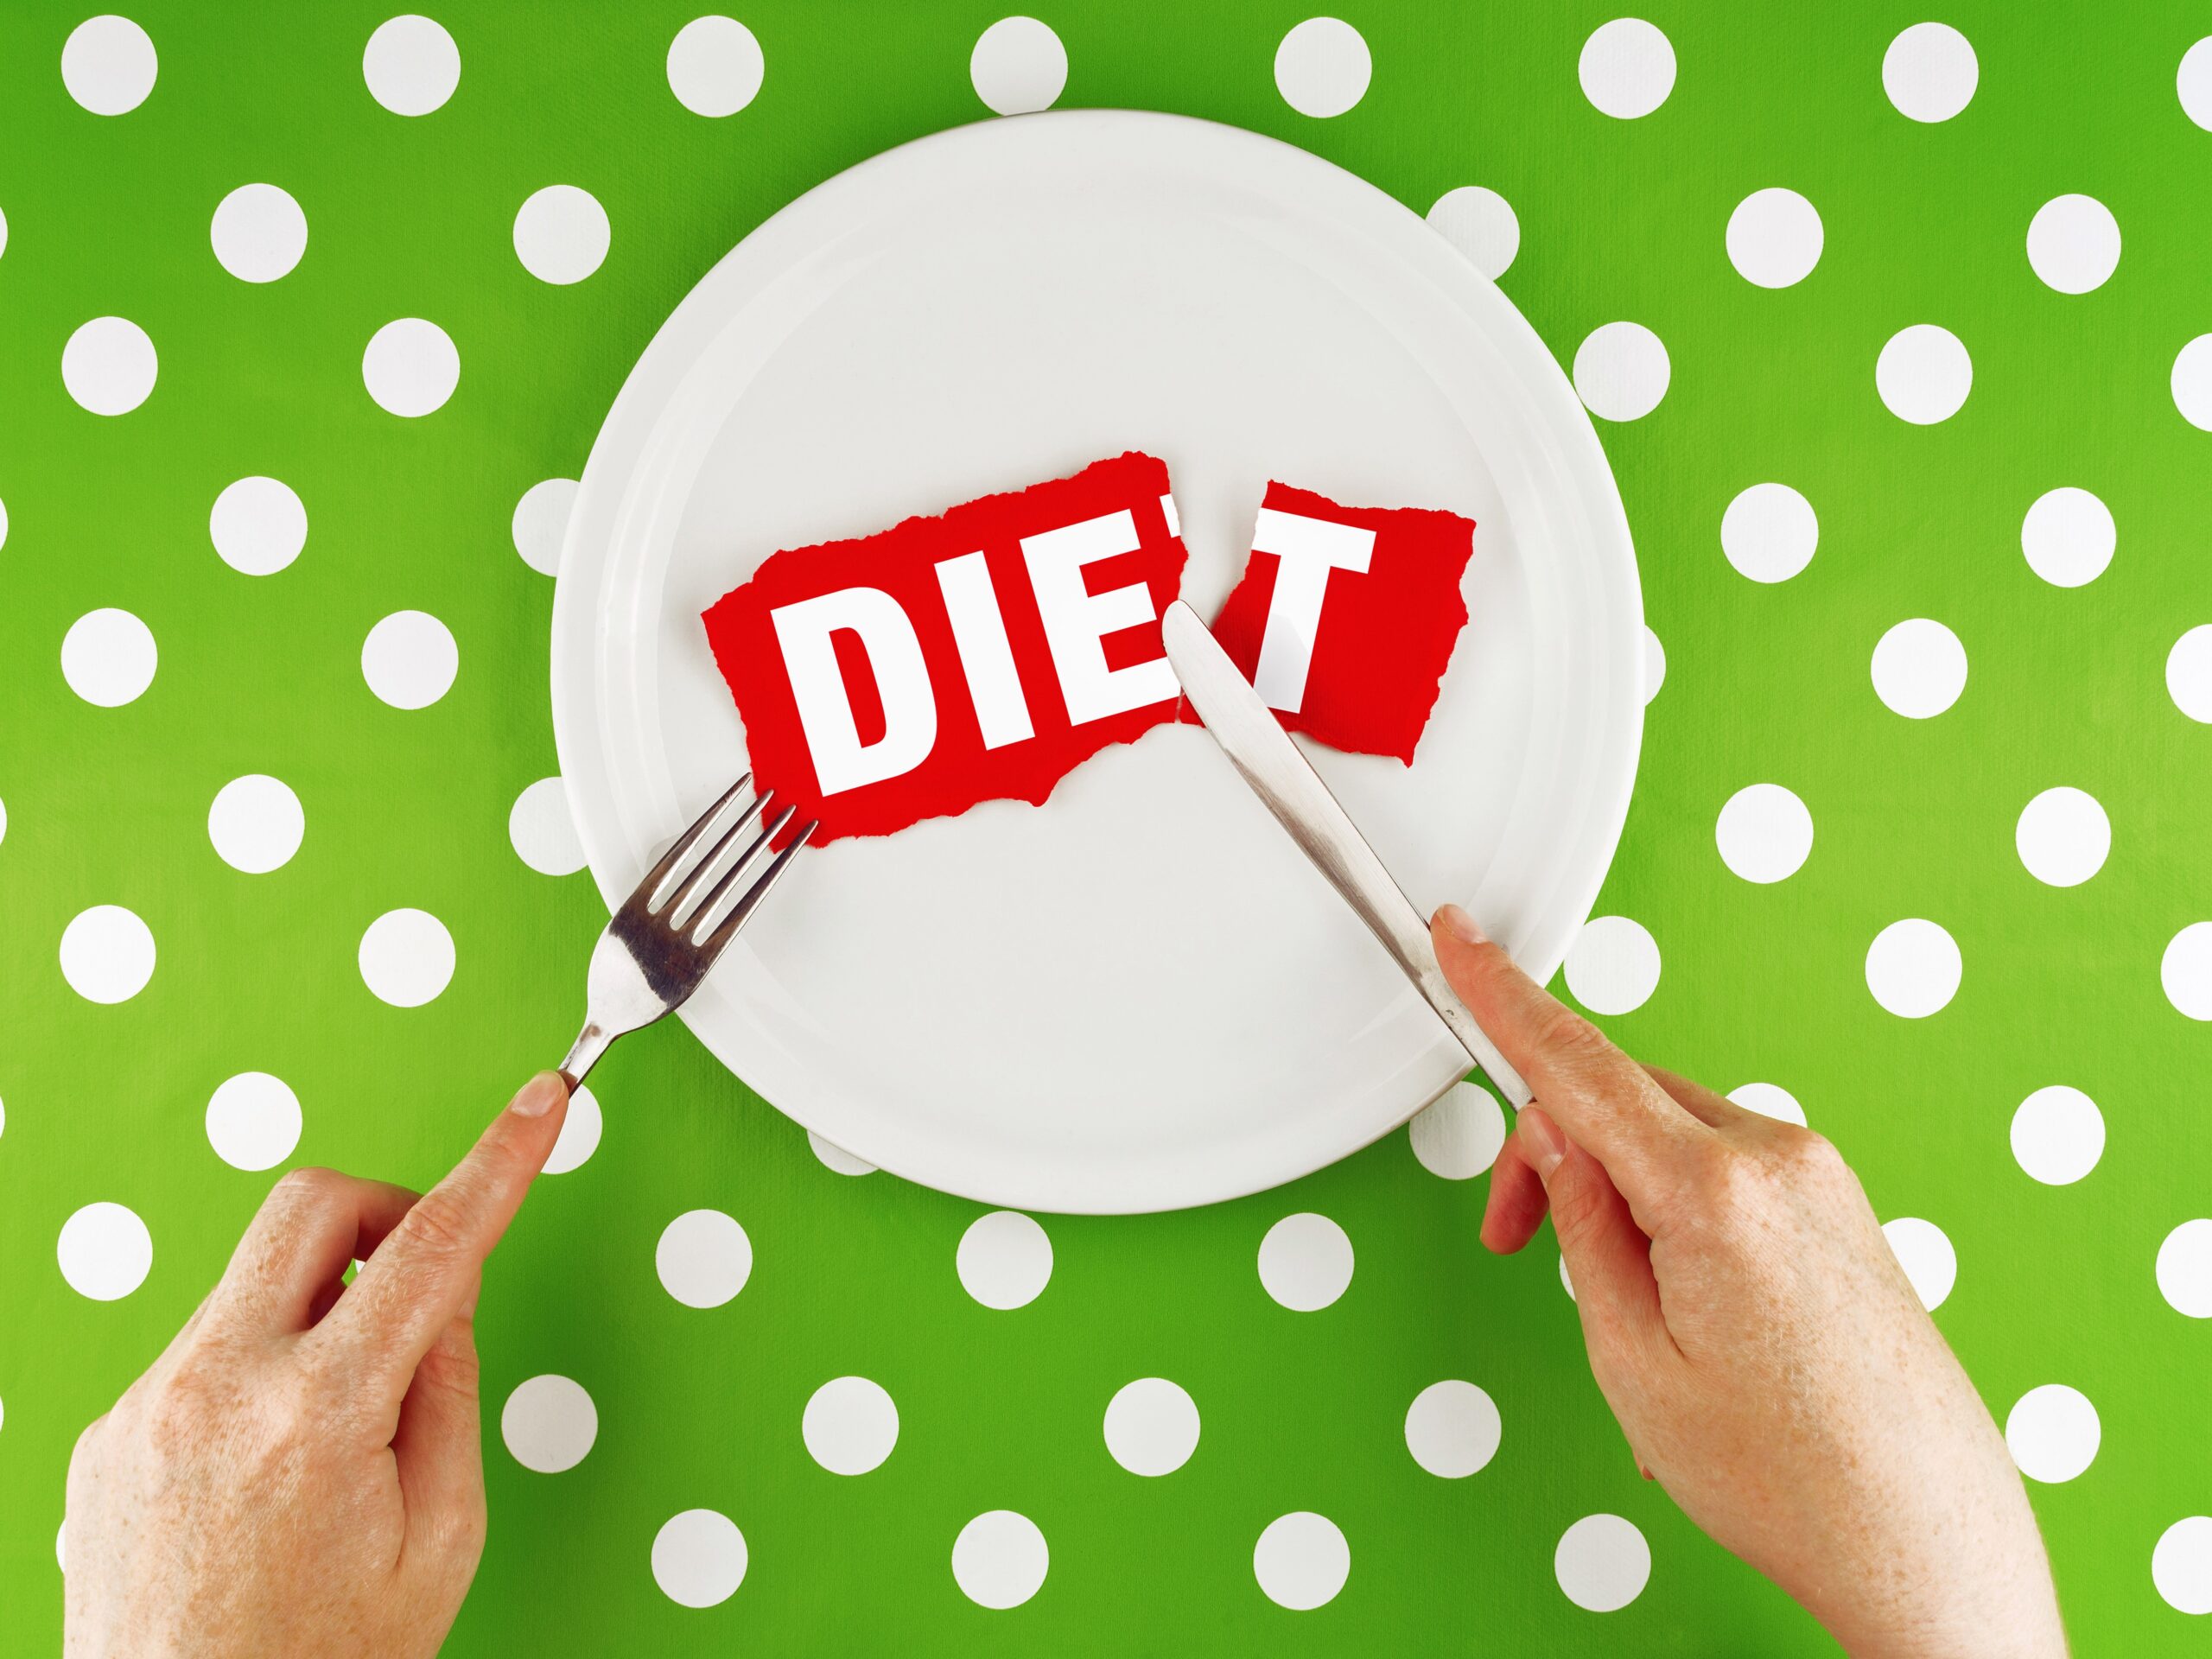 person holding a fork and knife, cutting into the word "diet" on a plate